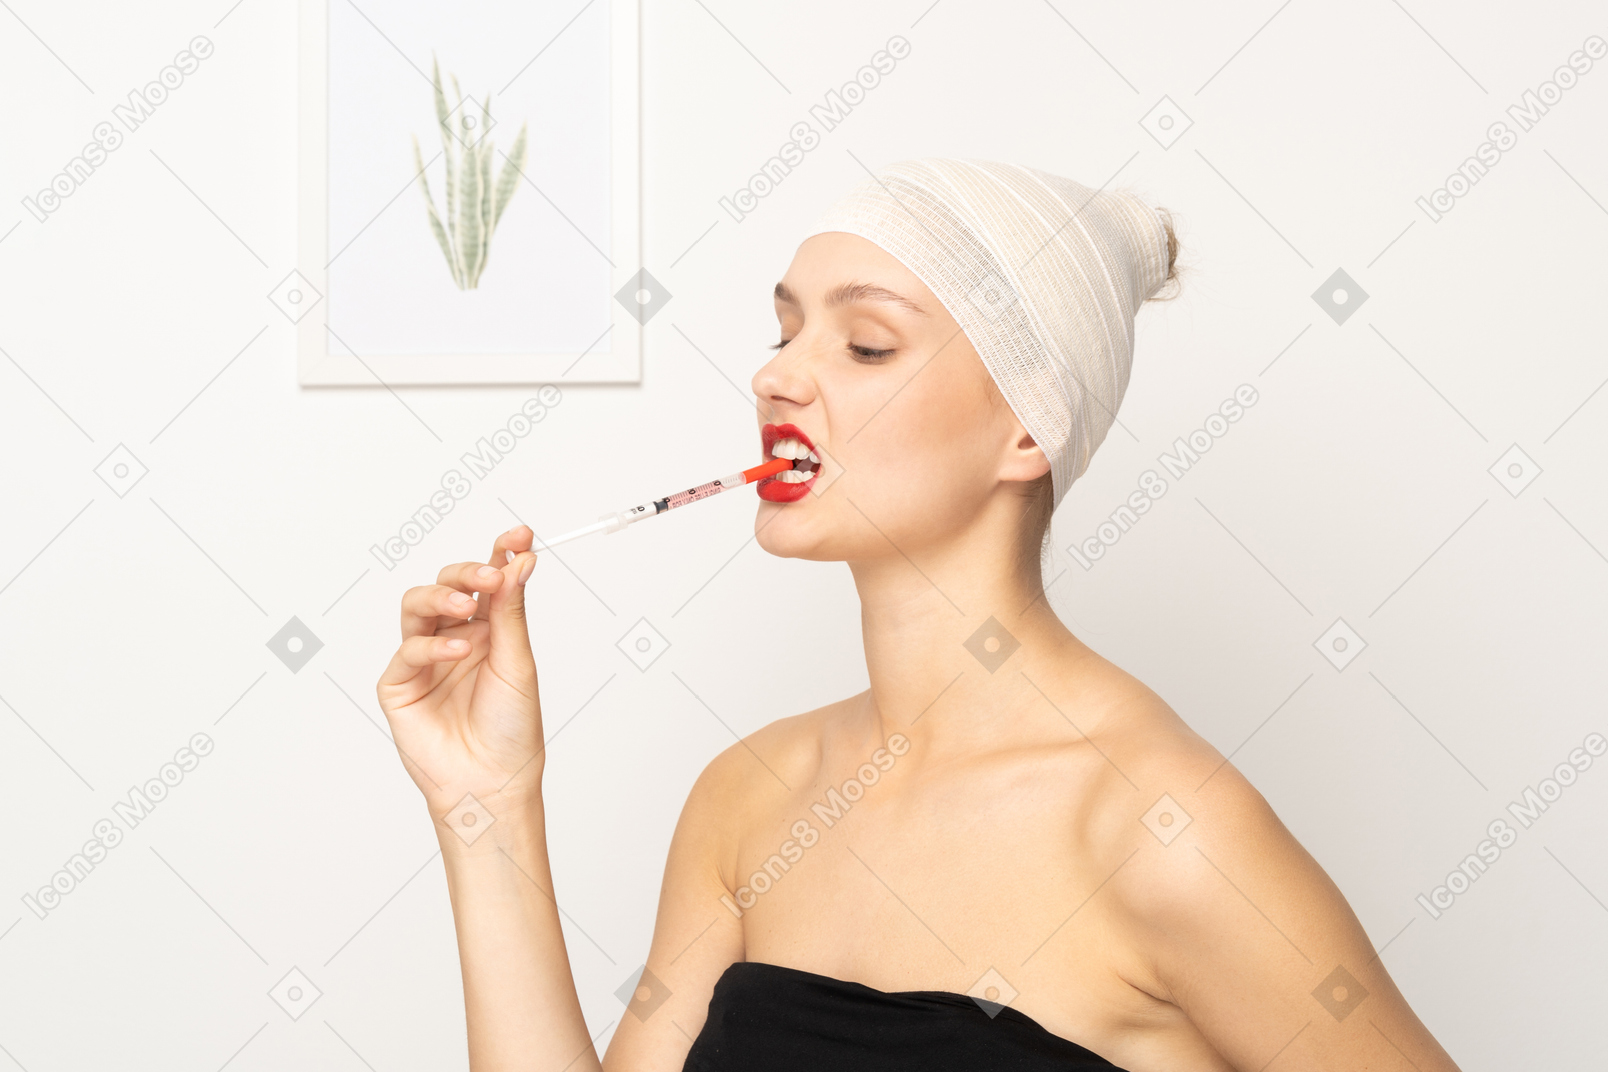 Portrait of a young woman biting syringe